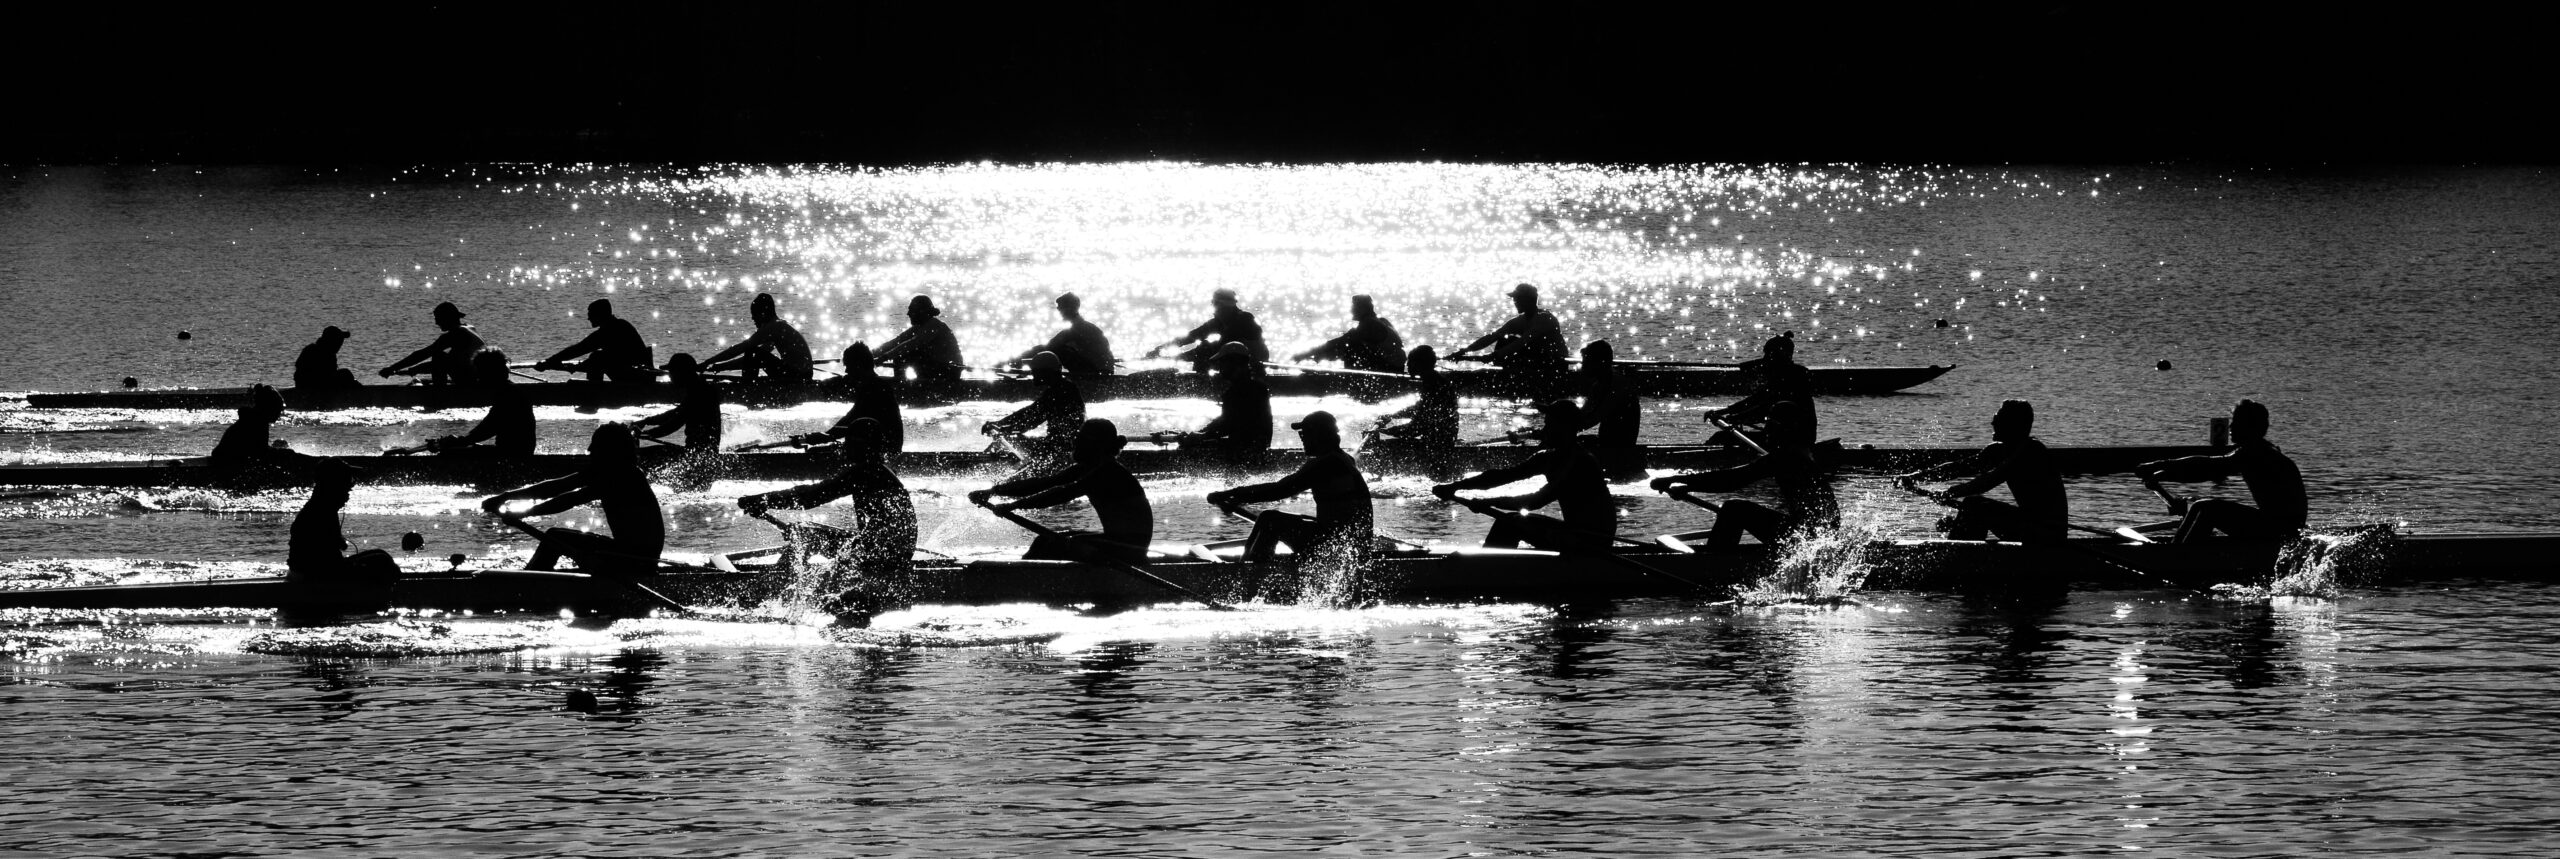 The,Morning,Sun,Behind,College,Rowers,Competing,On,Lake,Carnegie